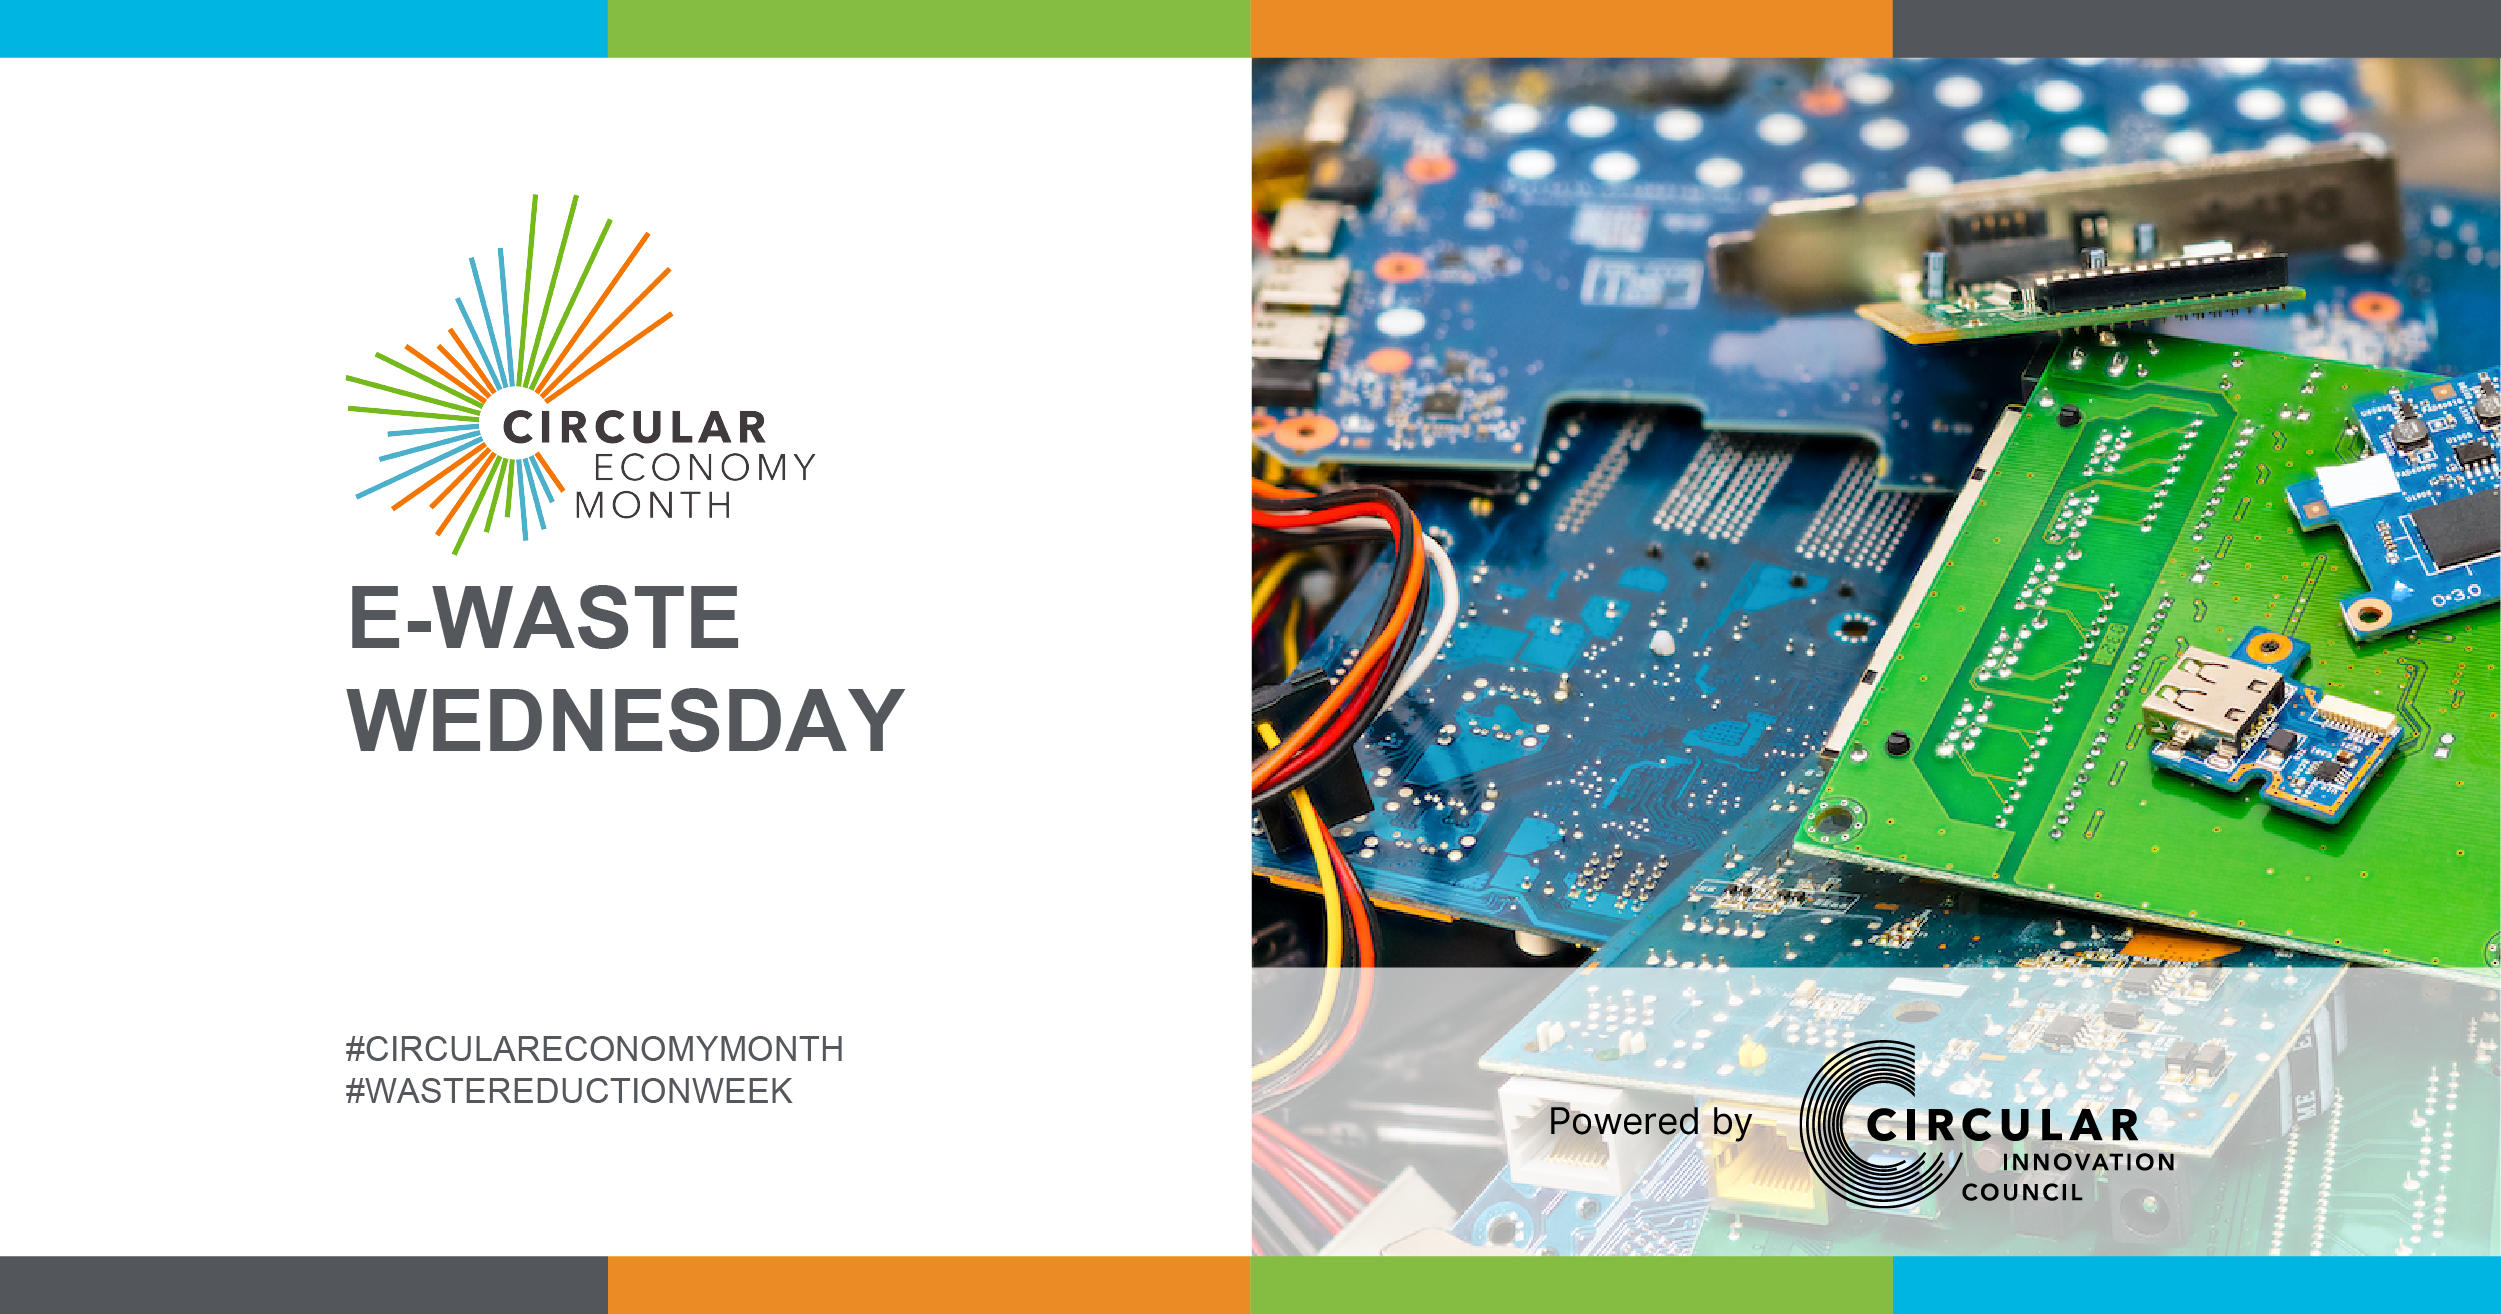 Green and blue computer chips collected into a pile. E-Waste Wednesday. #CircularEconomyMonth #WasteReductionWeek. Circular Economy Month, powered by Circular Innovation Council.